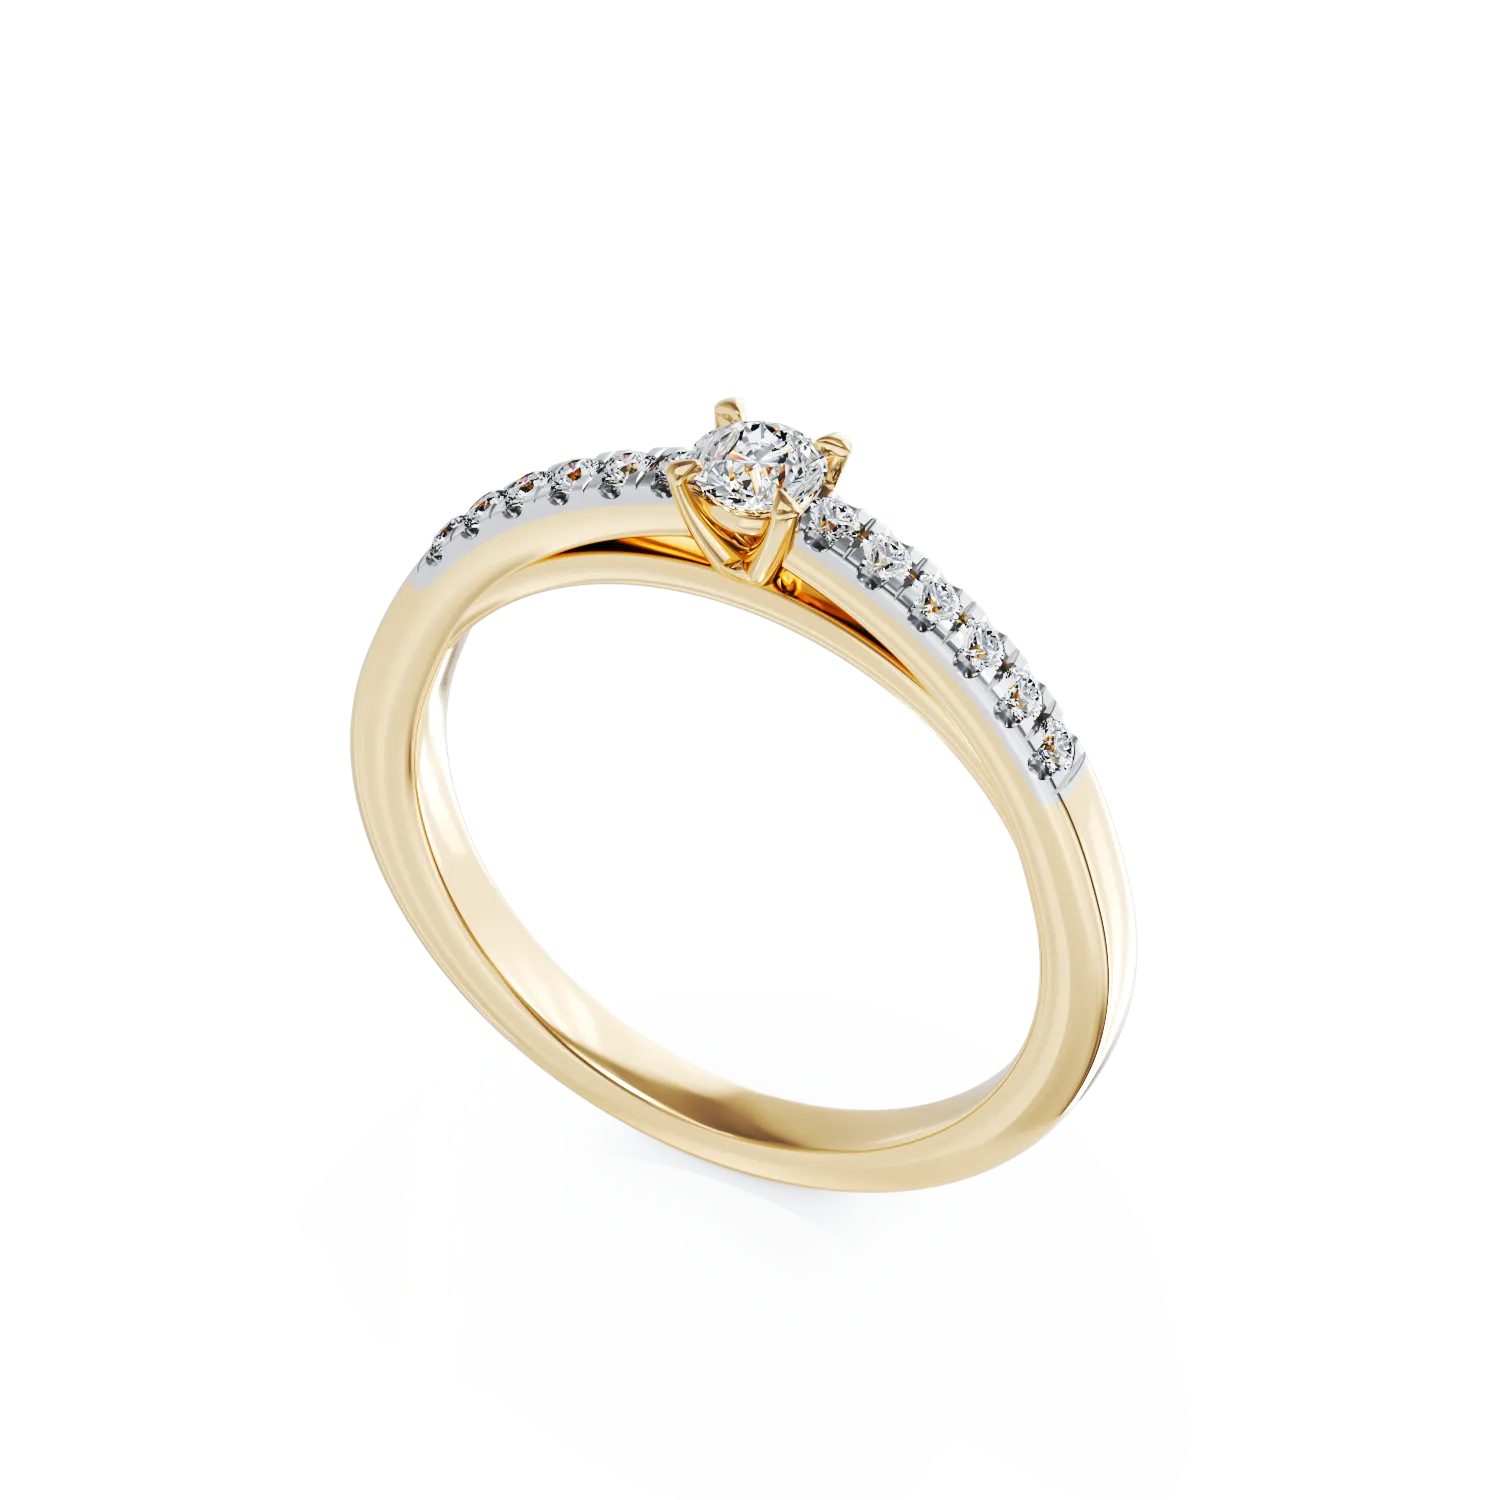 18K yellow gold engagement ring with 0.325ct diamond and 0.13ct diamonds